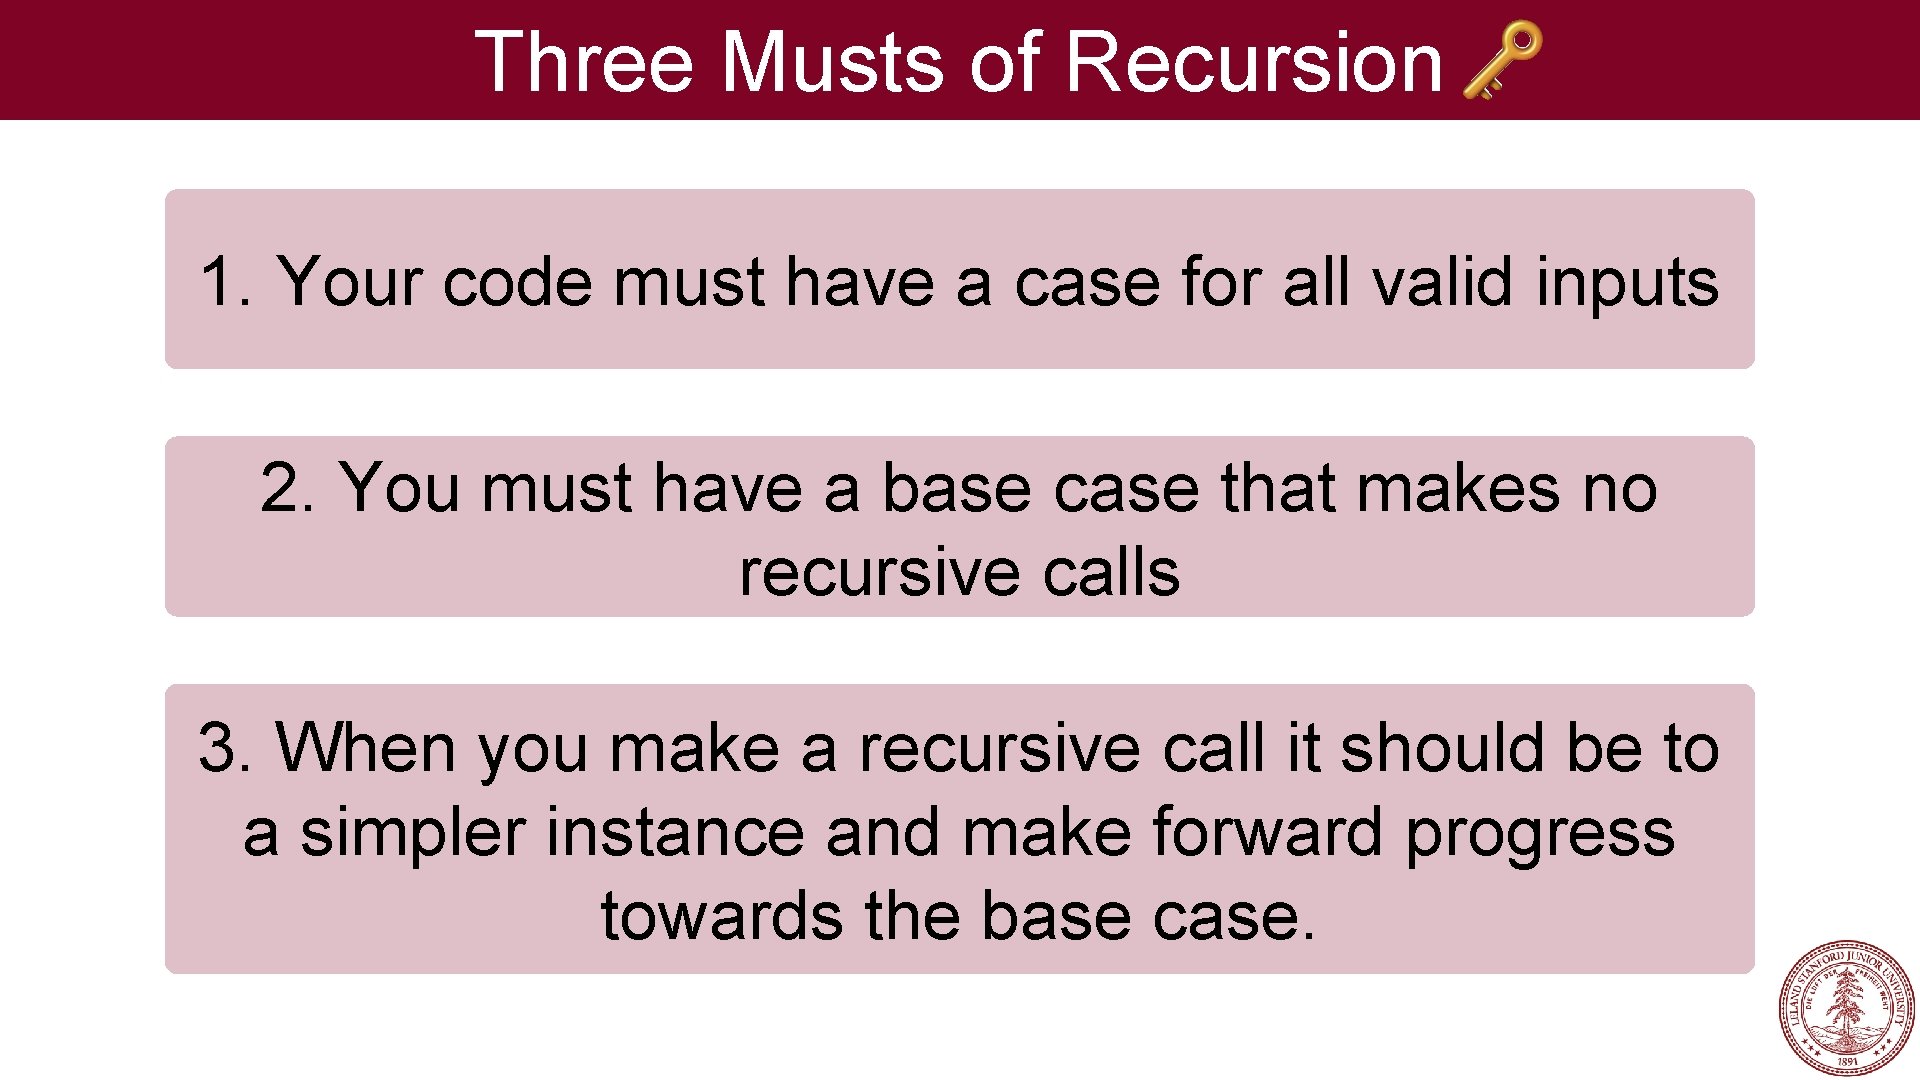 Three Musts of Recursion 1. Your code must have a case for all valid